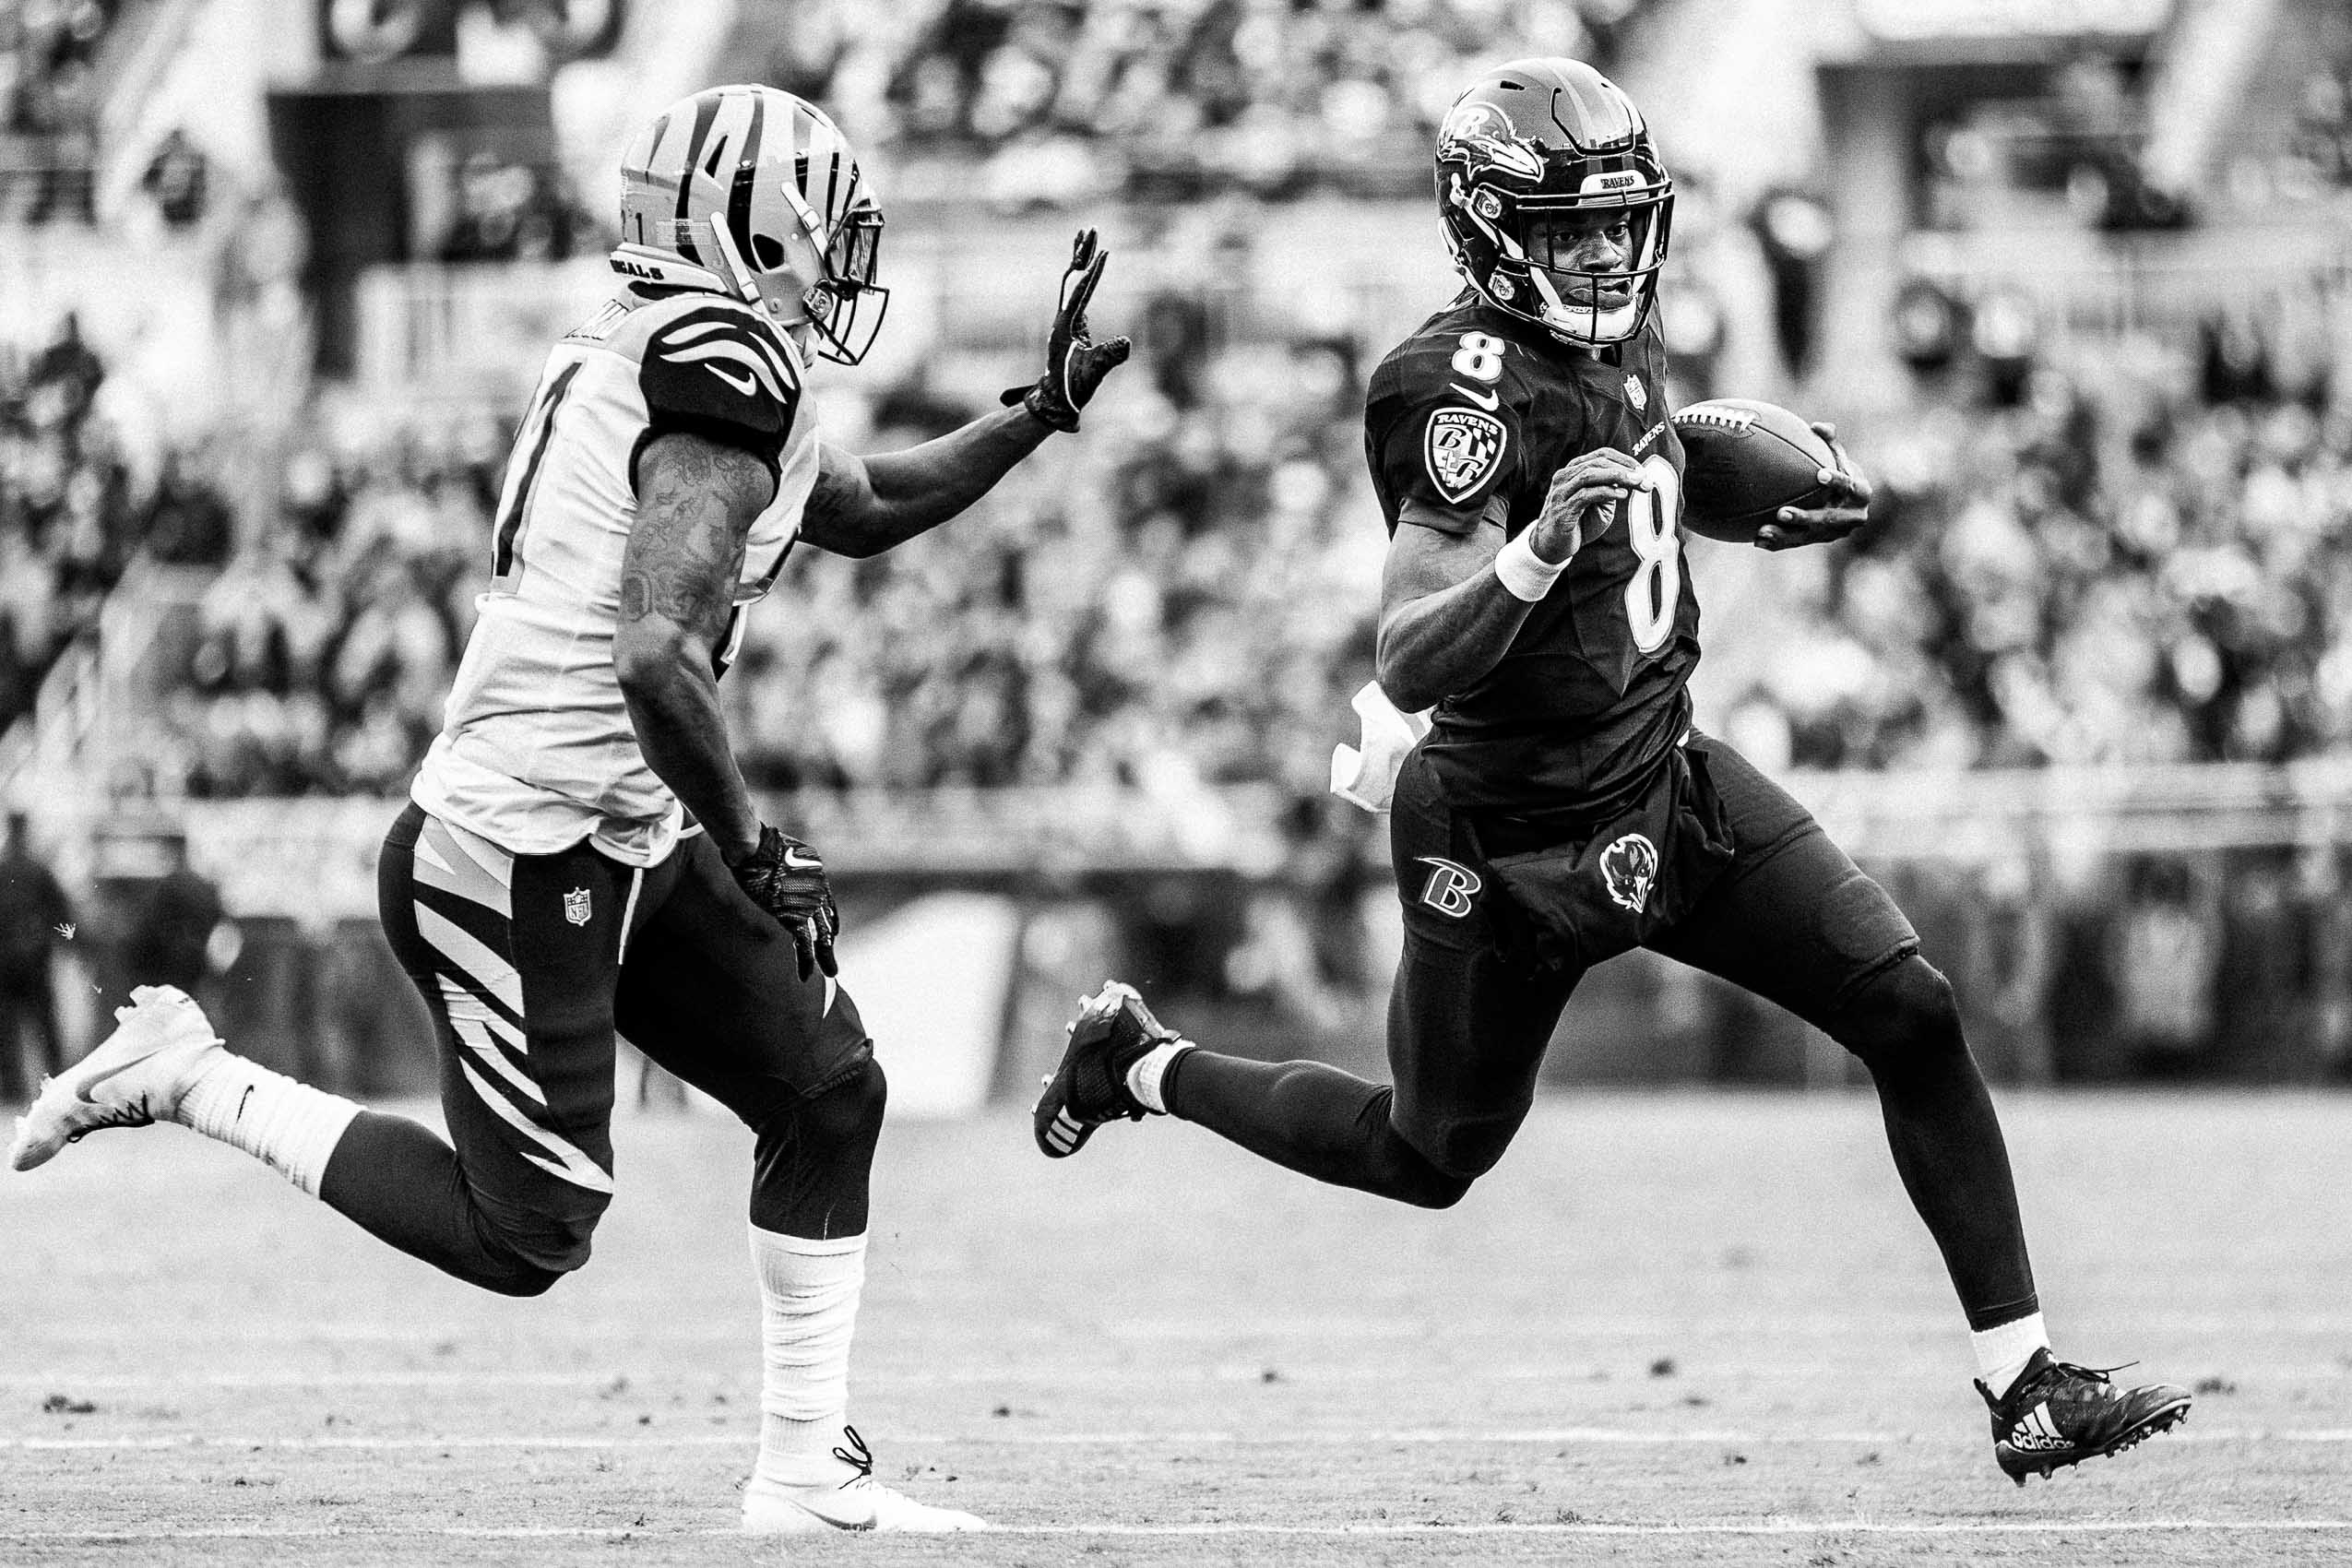 NFL MVP LAMAR JACKSON PHOTOGRAPHY GUARANTEED CONTRACT HIGHEST PAID PLAYER IN NFL HISTORY PHOTOGRAPHED BY DOCUMENTARY SPORTS PHOTOGRAPHER IN BALTIMORE MD